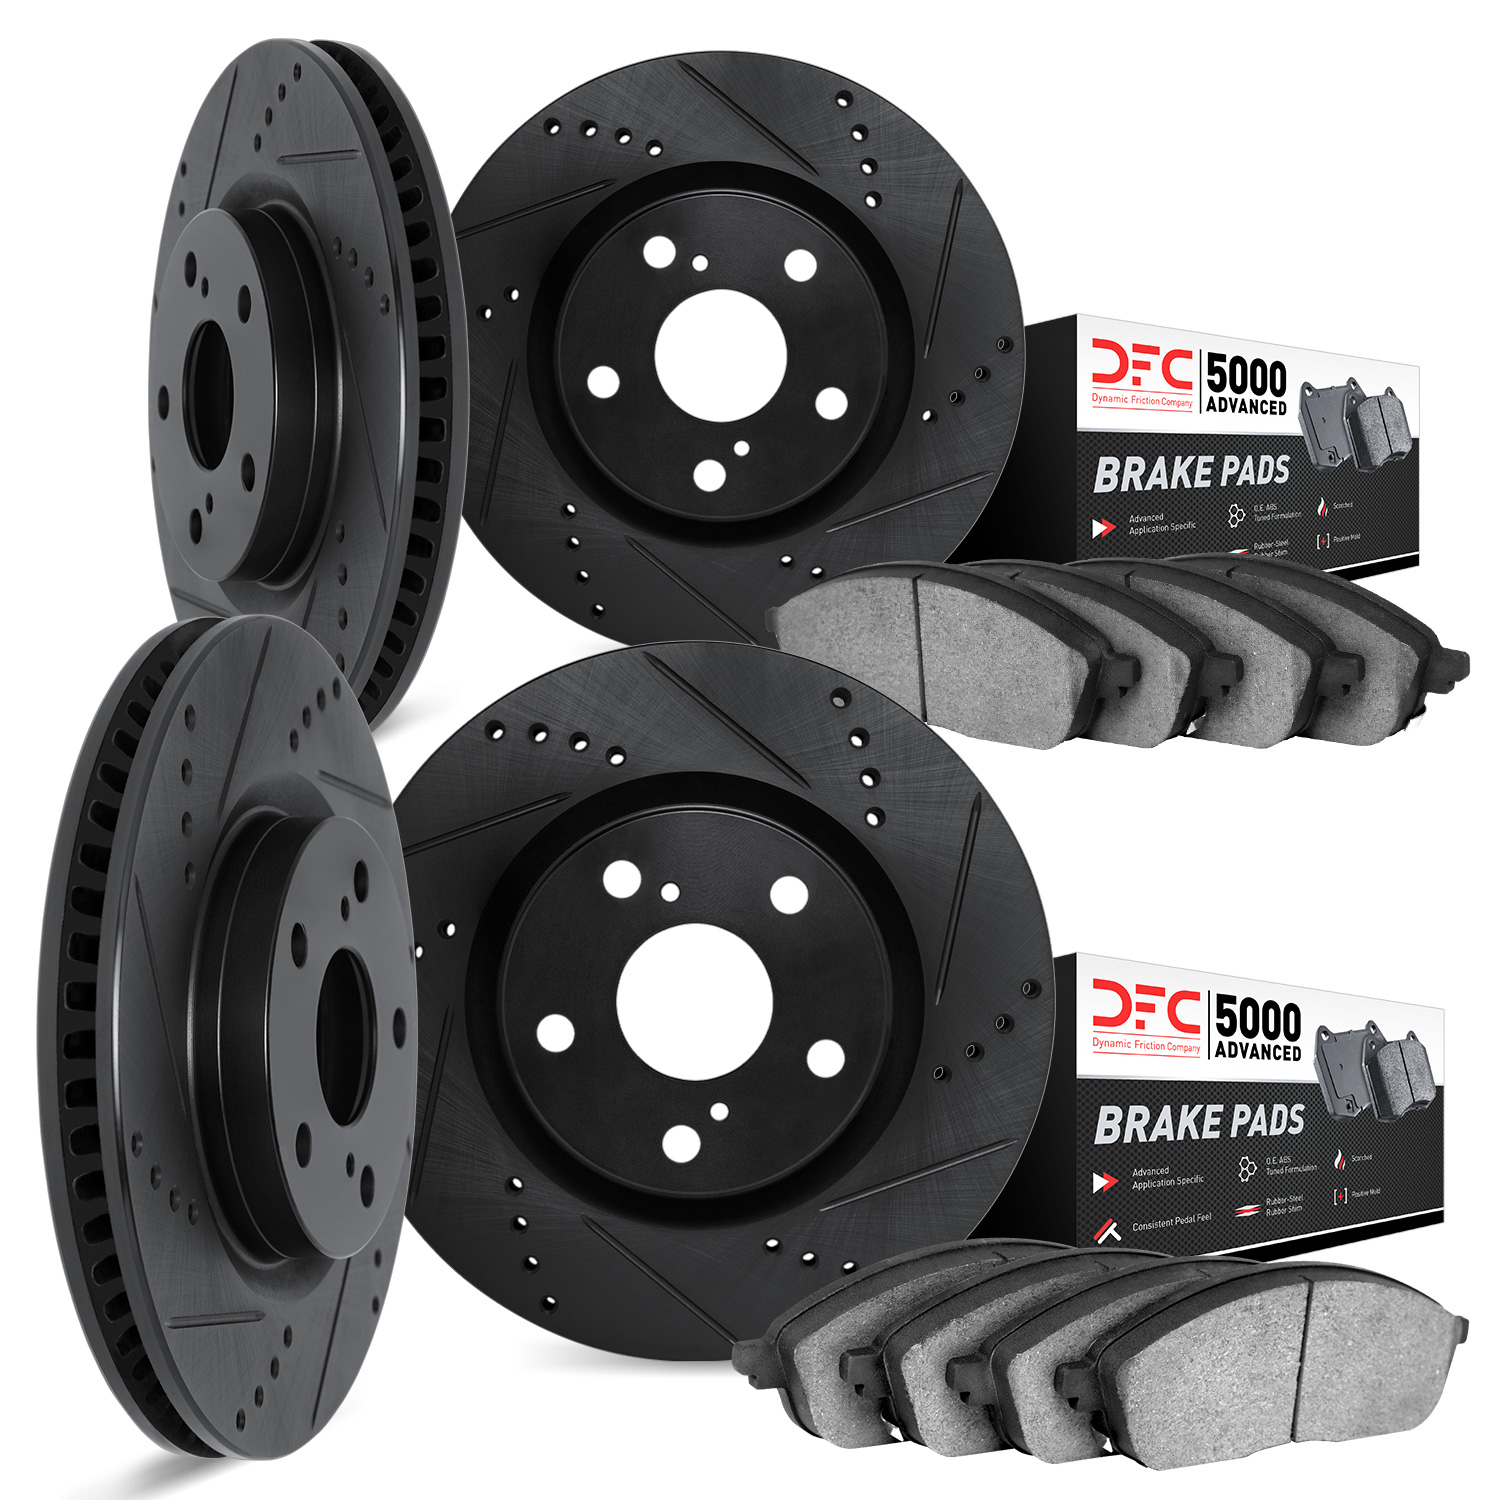 8504-68006 Drilled/Slotted Brake Rotors w/5000 Advanced Brake Pads Kit [Black], 2014-2014 Infiniti/Nissan, Position: Front and R